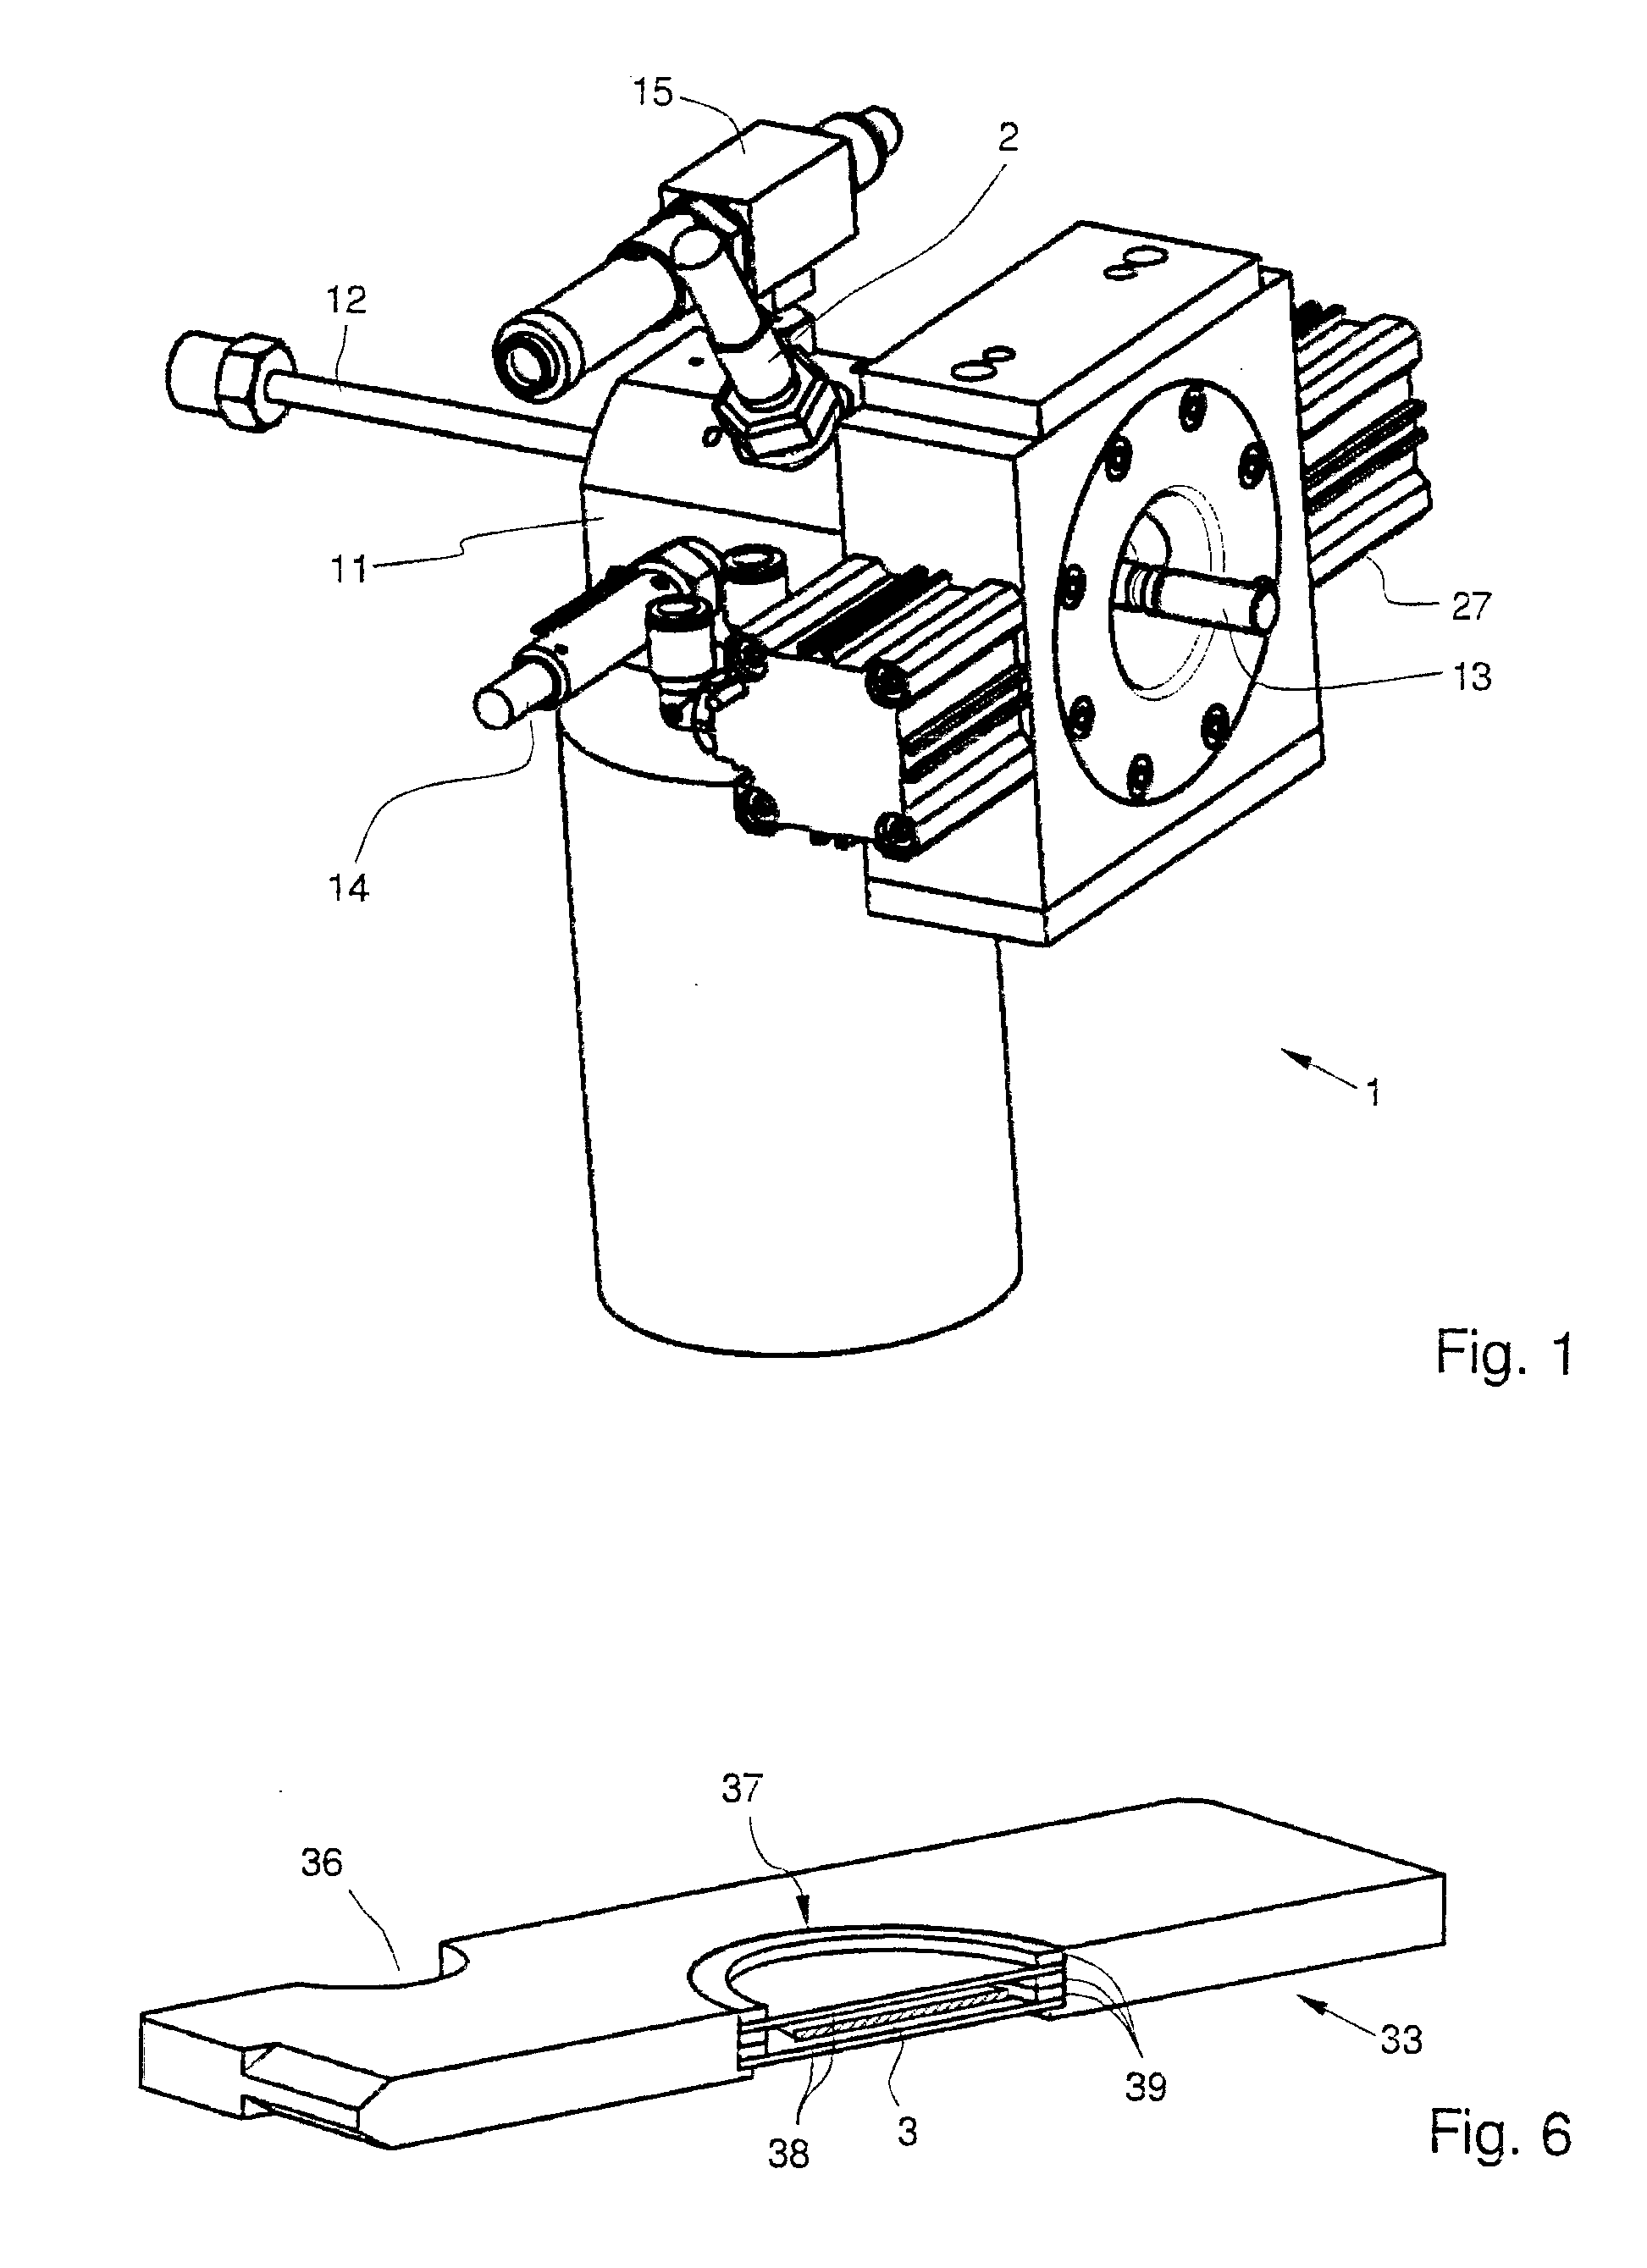 Device for the light stimulation and cryopreservation of biological samples